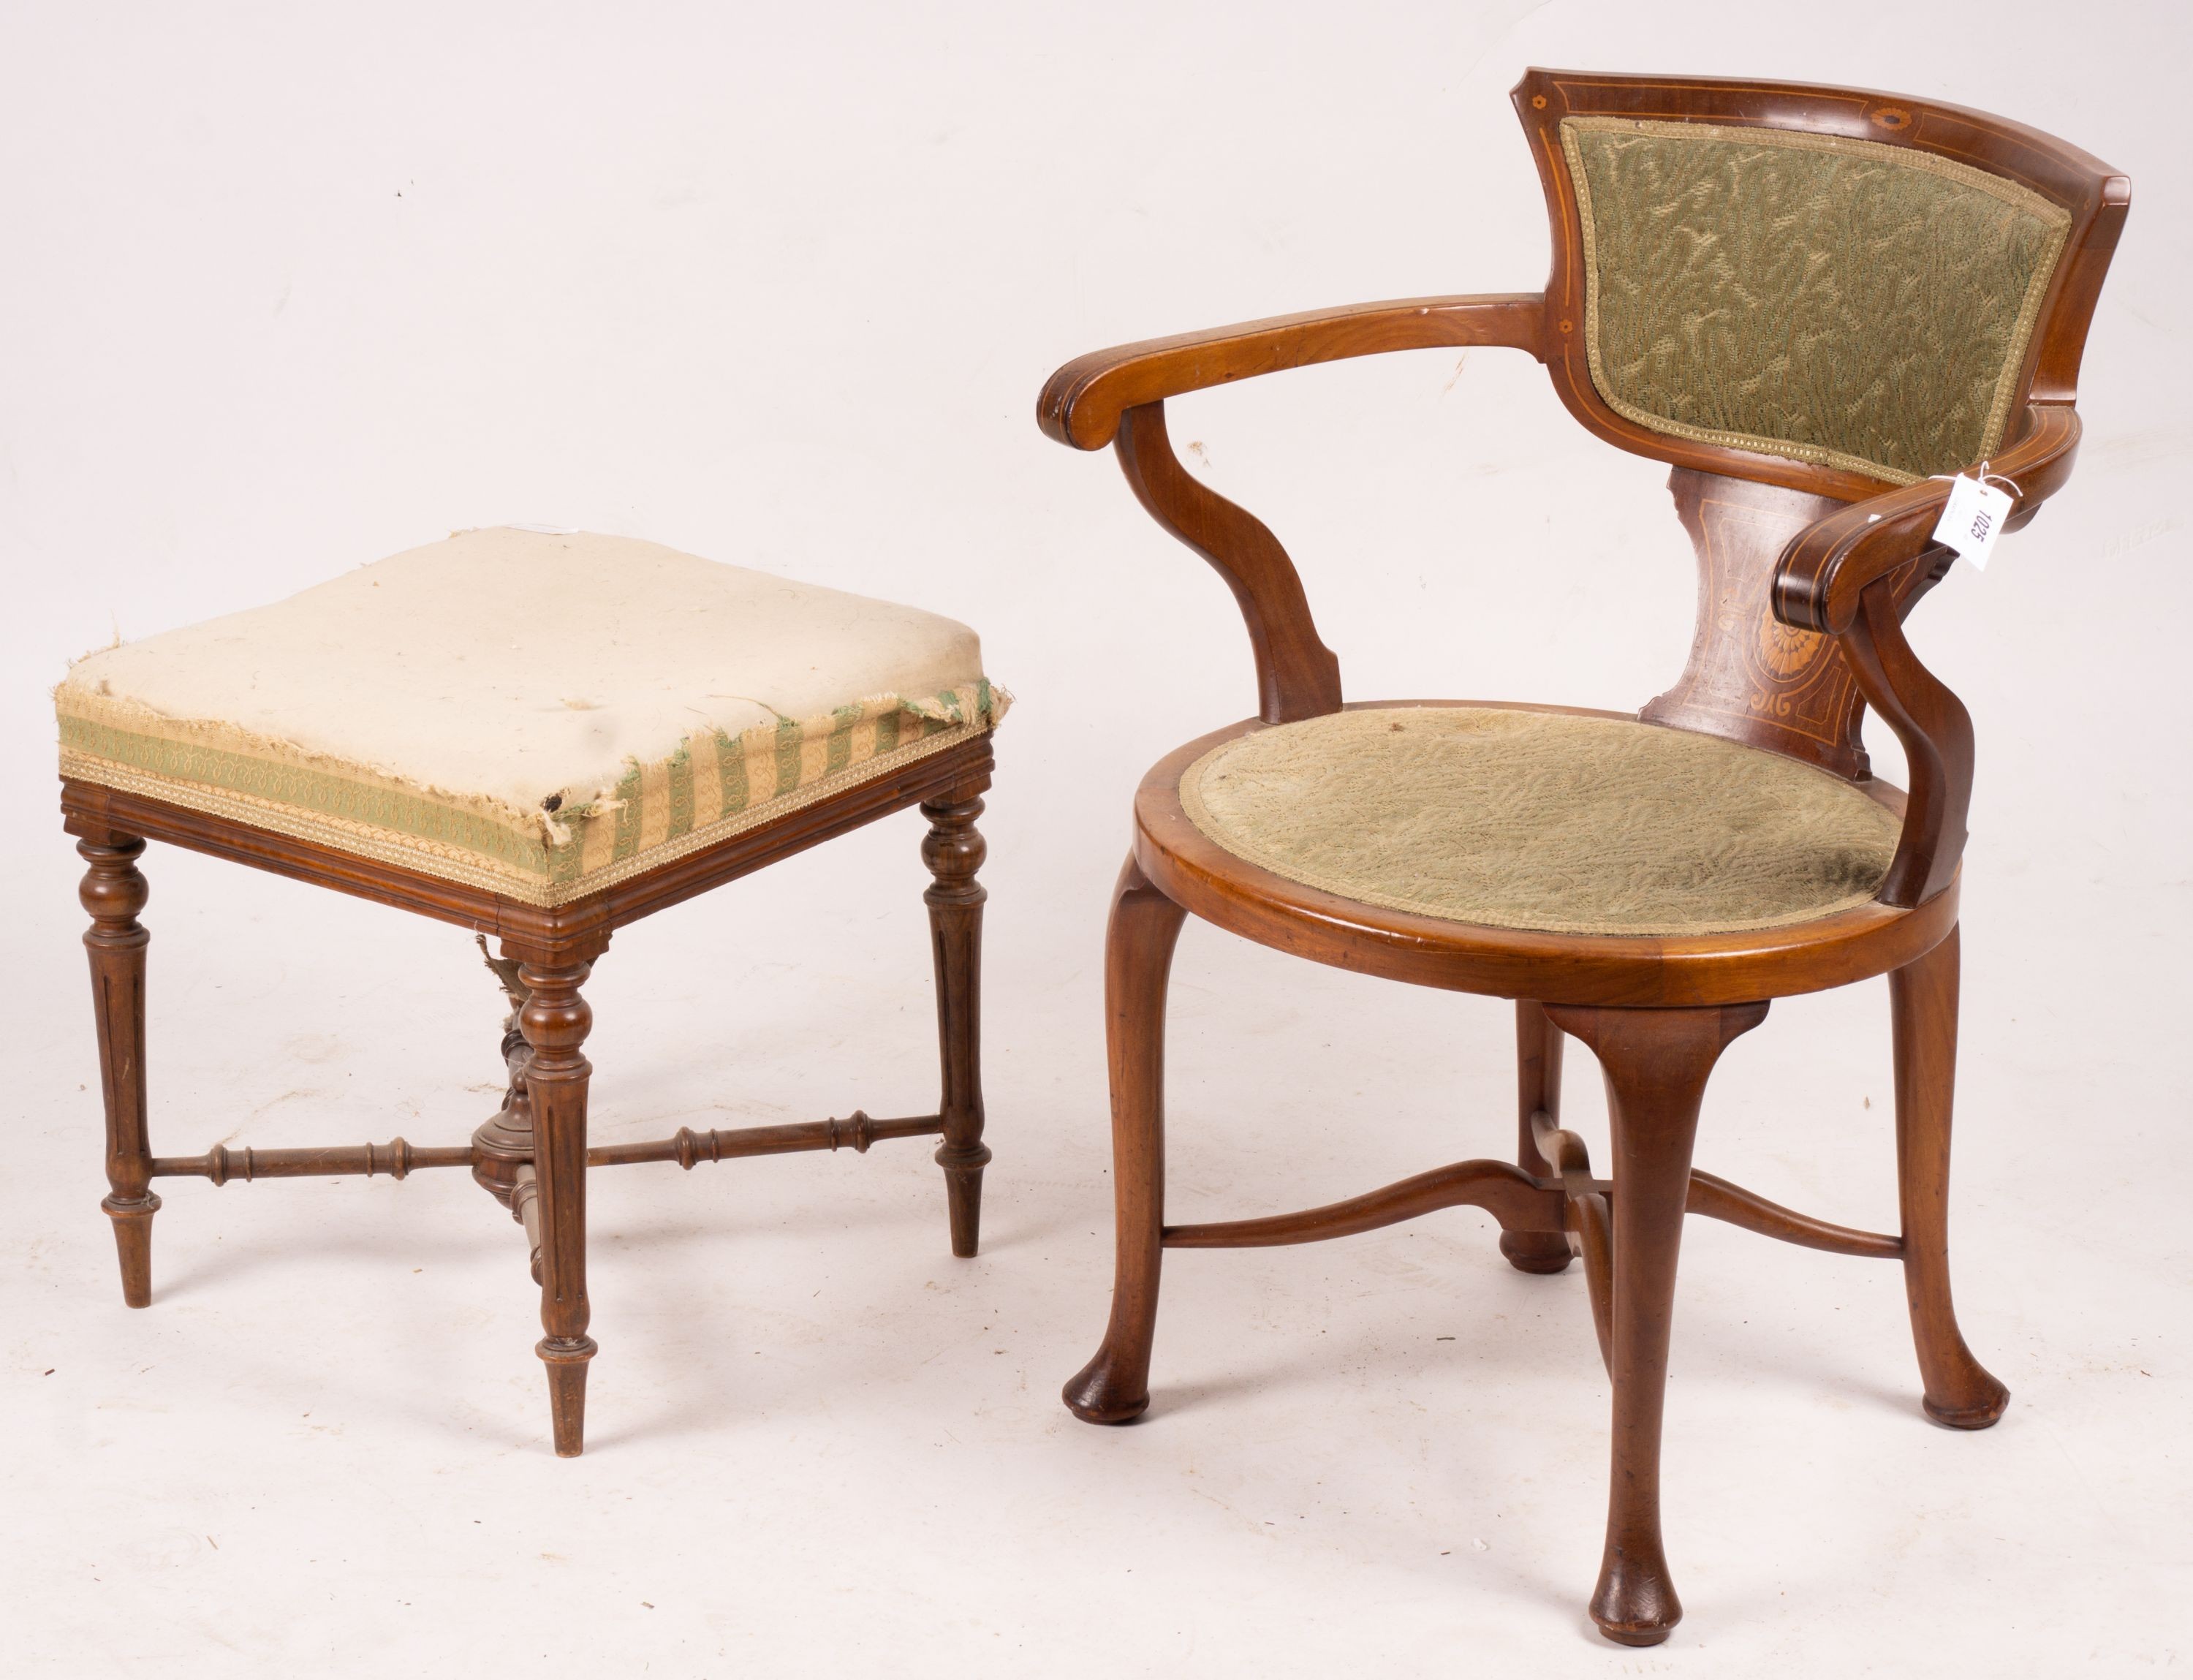 An Edwardian marquetry inlaid mahogany elbow chair and a Victorian dressing stool